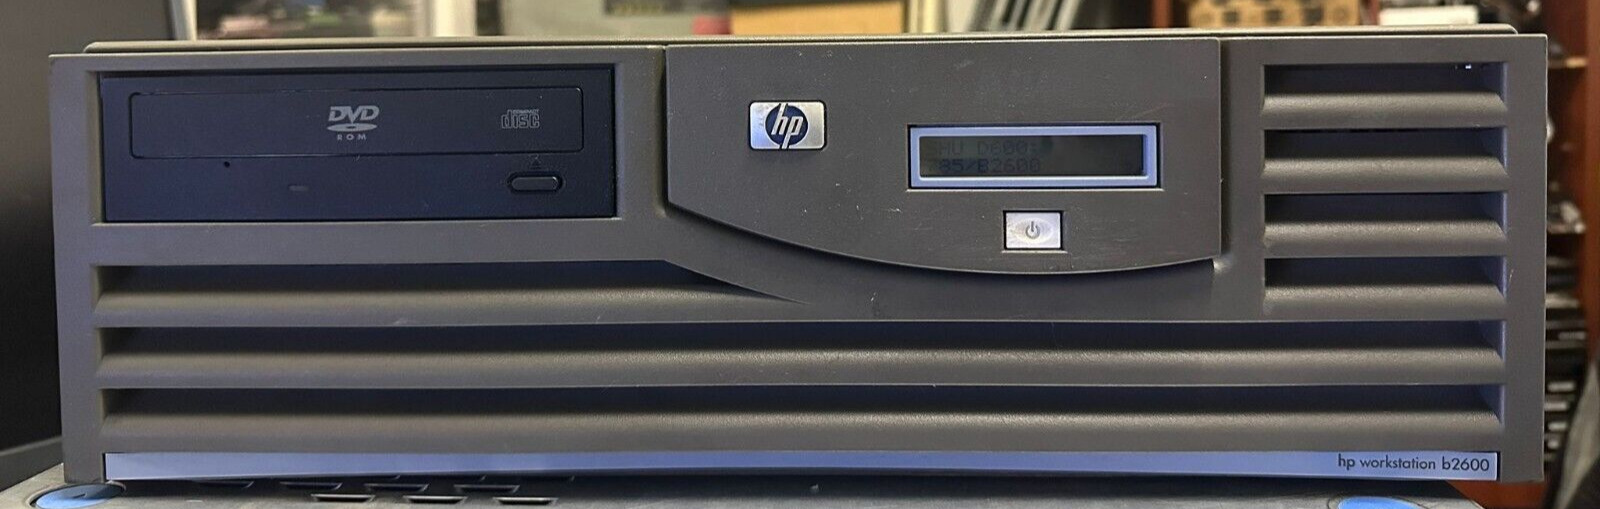 Hp b2600 Workstation 1 GB Ram 36 GB Hdd OS Available with 3 Months Warranty